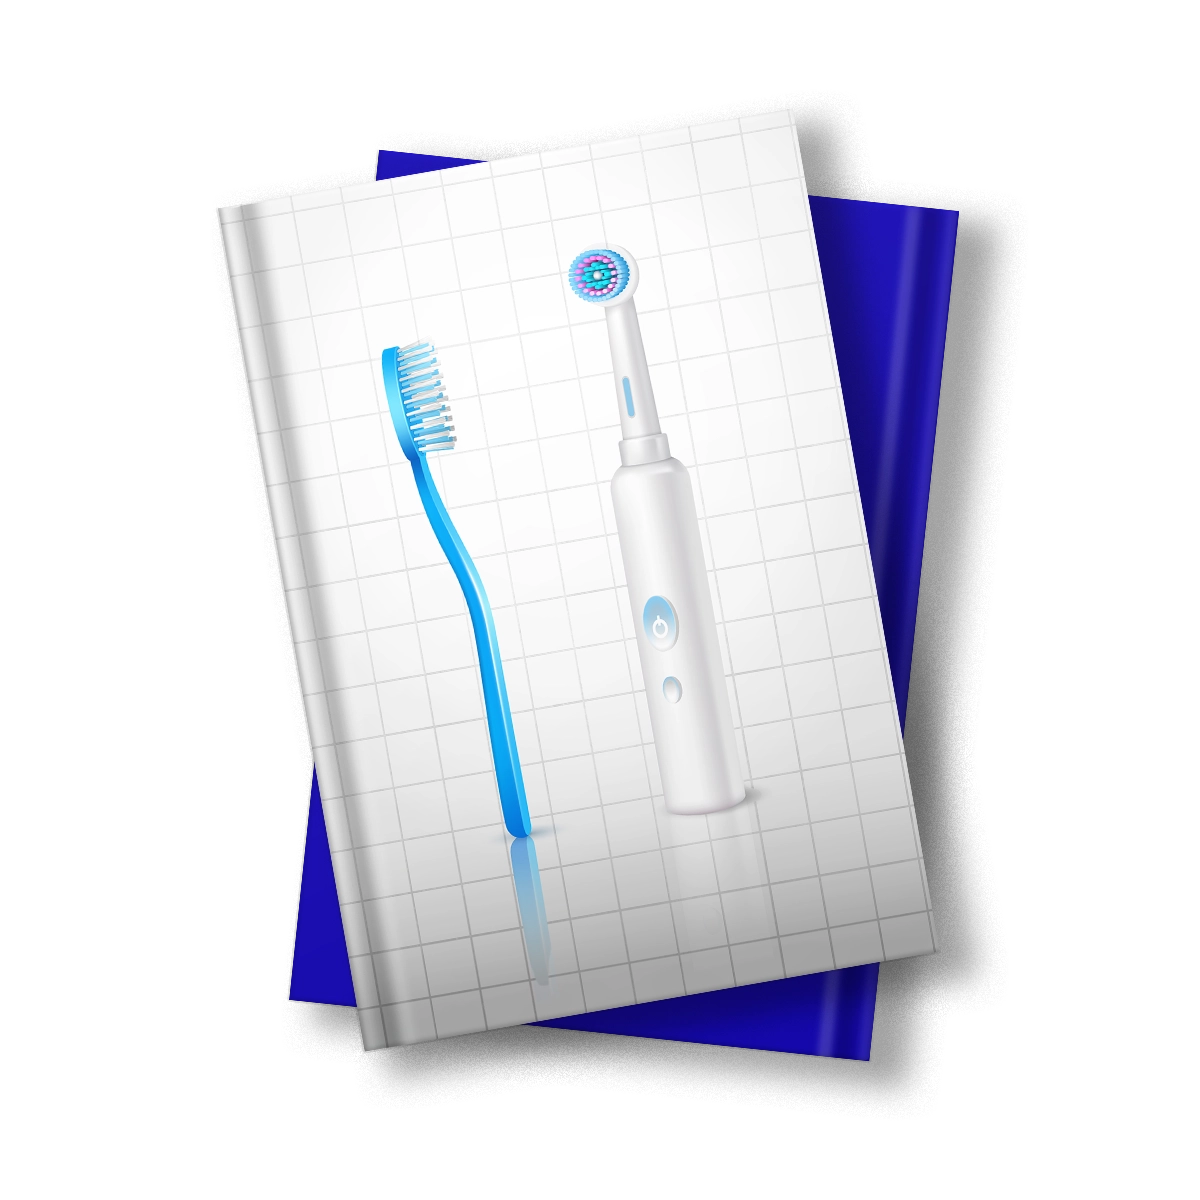 Free Toothbrush Offer By University Ave Dental